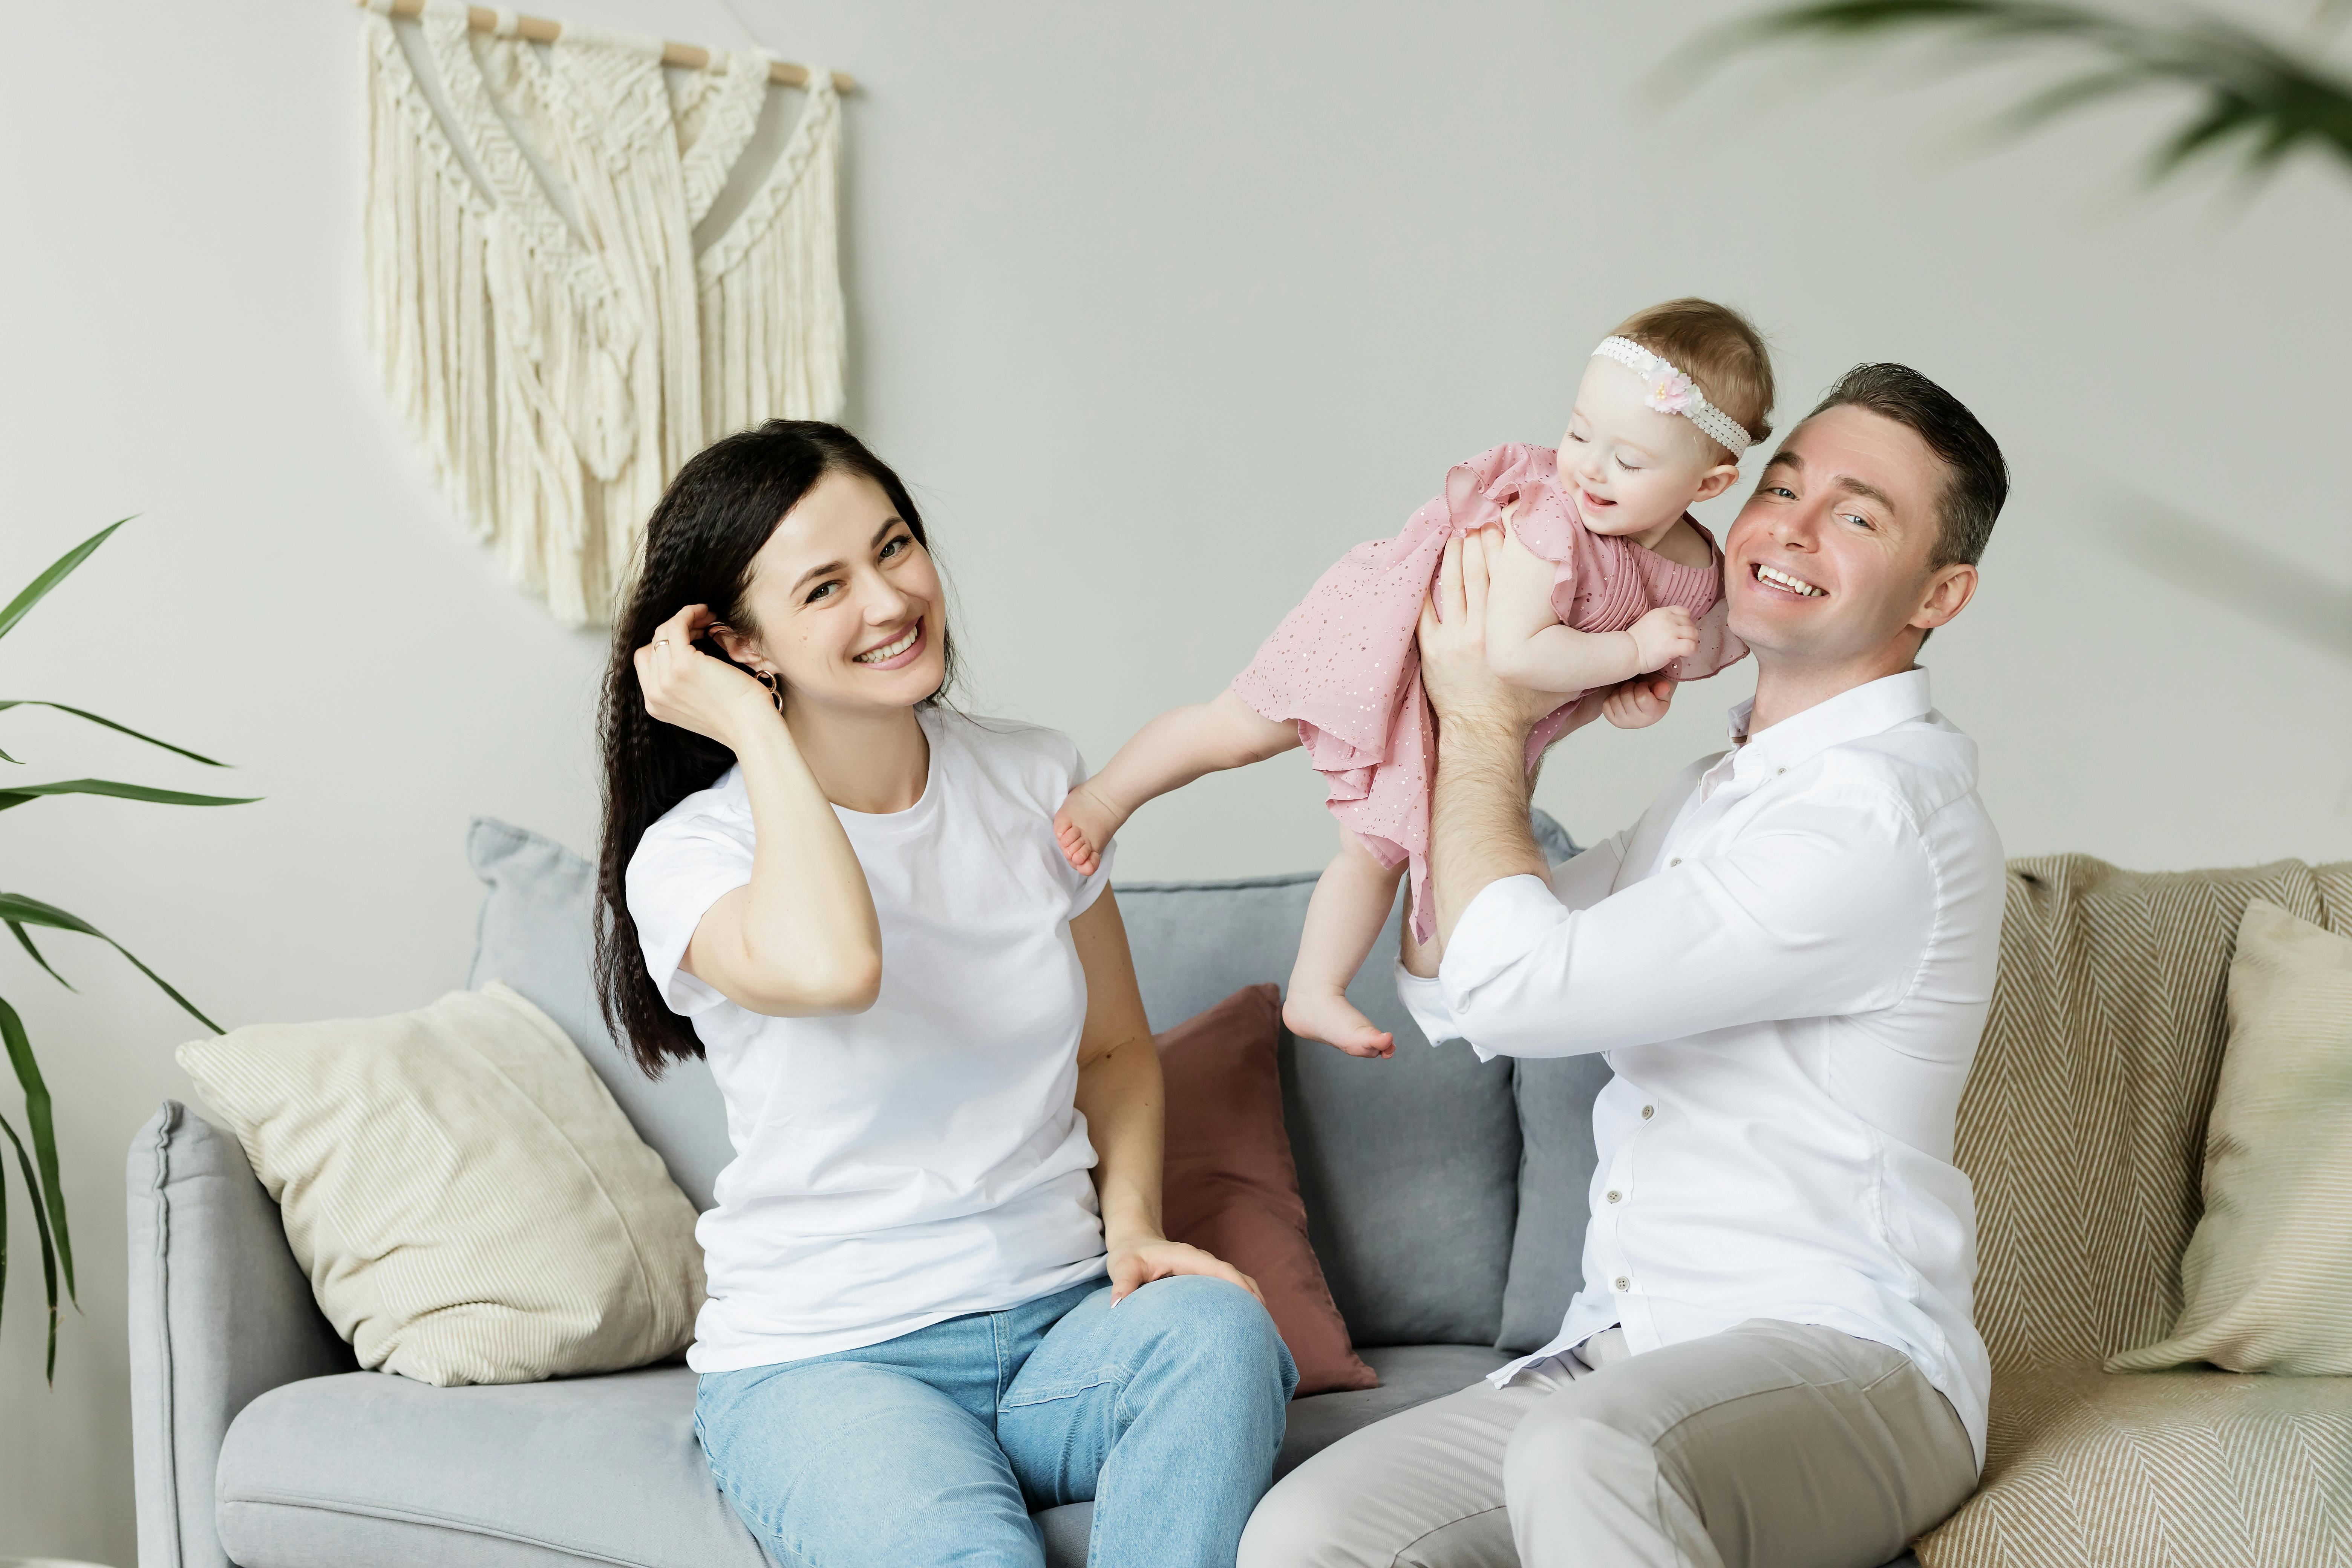 A happy couple playing with their daughter | Source: Pexels